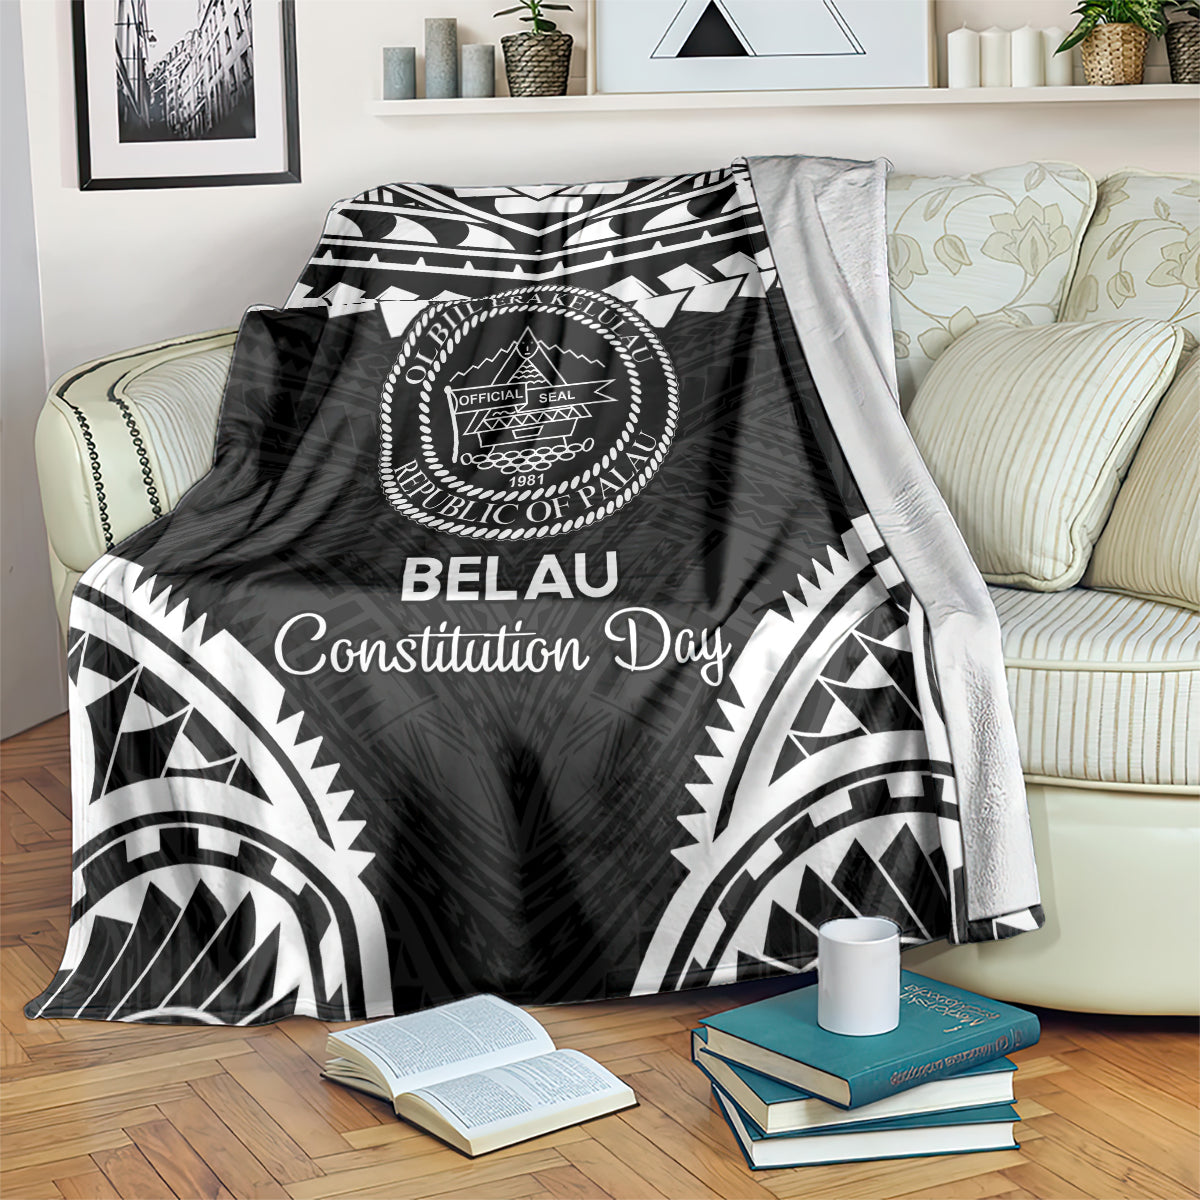 Palau Constitution Day Blanket Belau Seal With Polynesian Pattern - Black